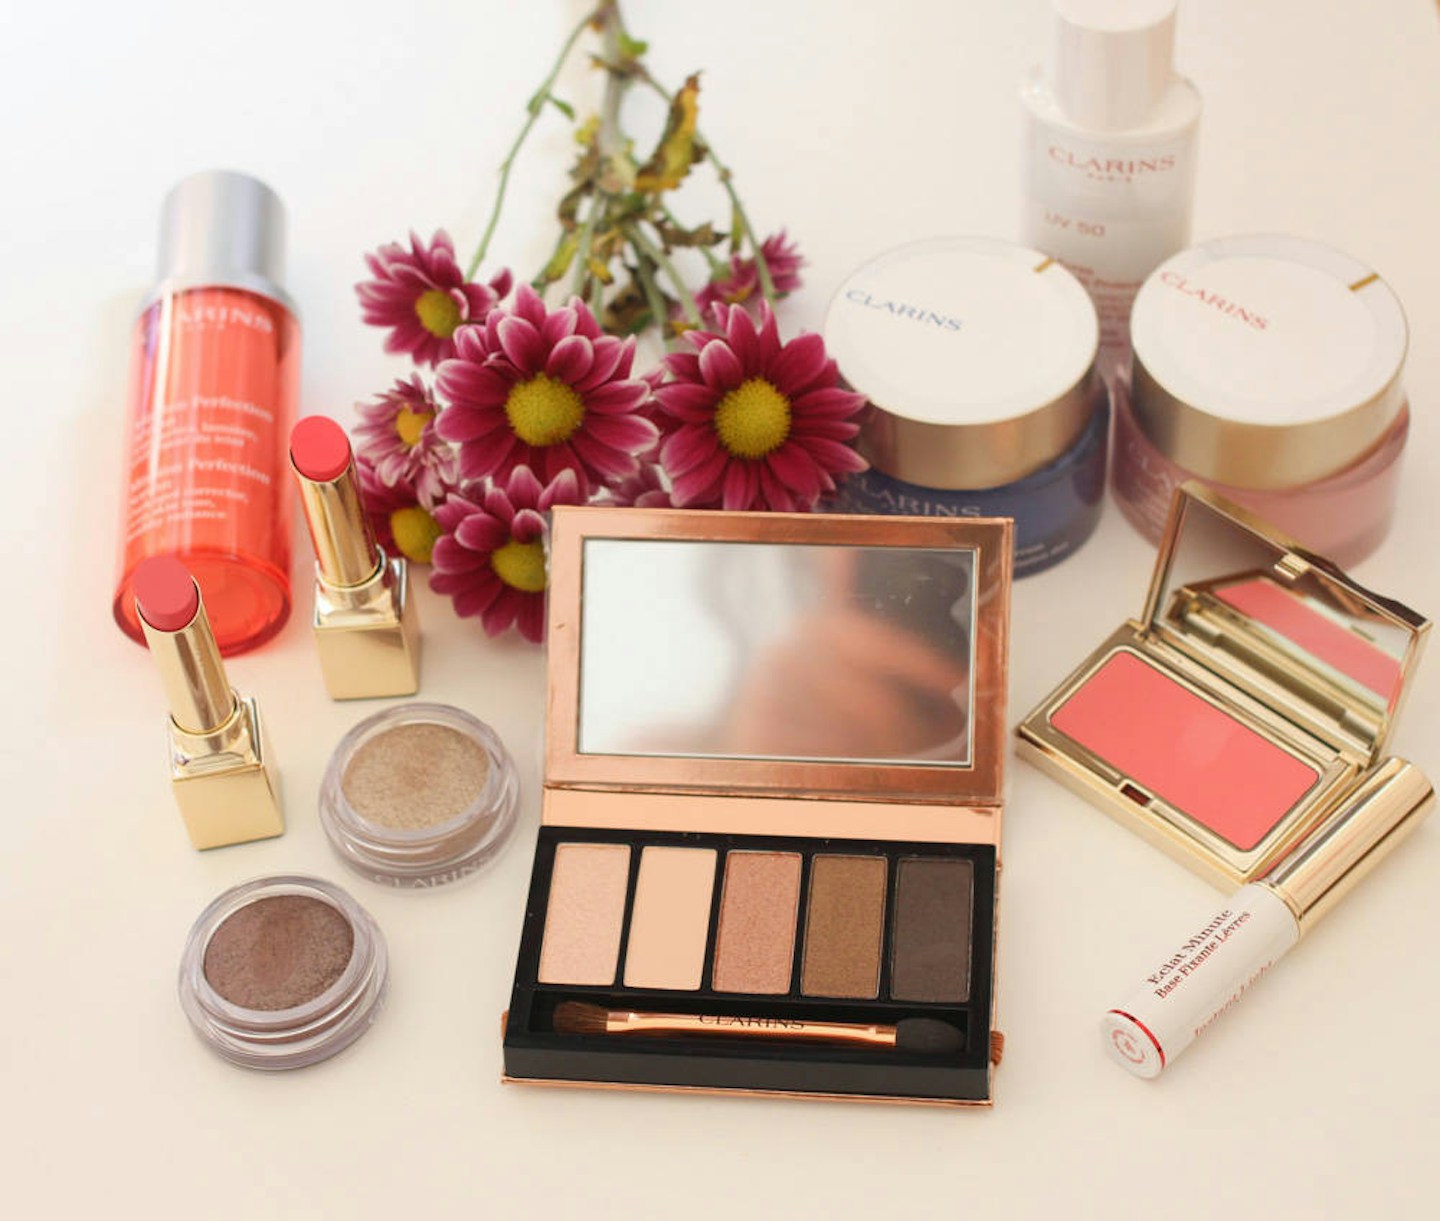 Clarins Multi-Active Review + a Spring Beauty look